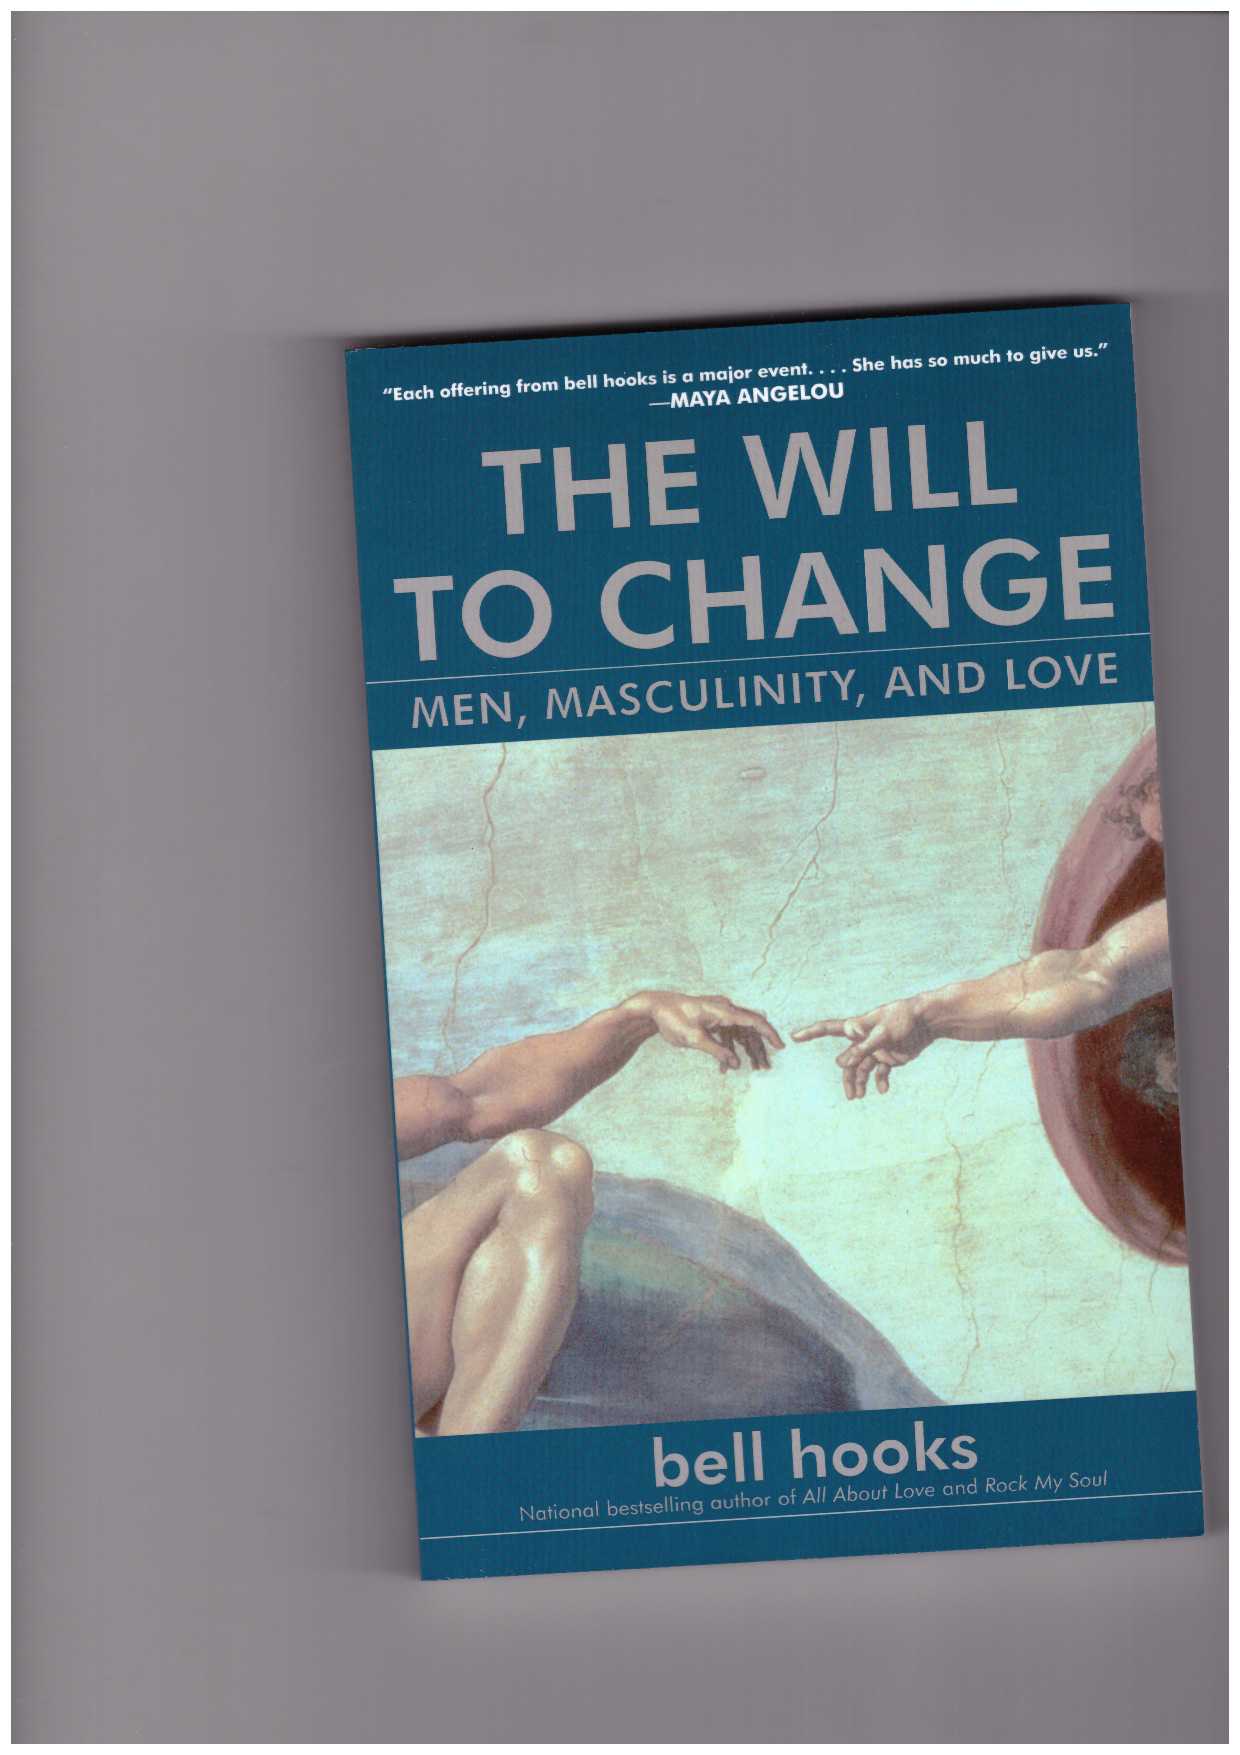 hooks, bell - The Will to Change: Men, Masculinity, and Love